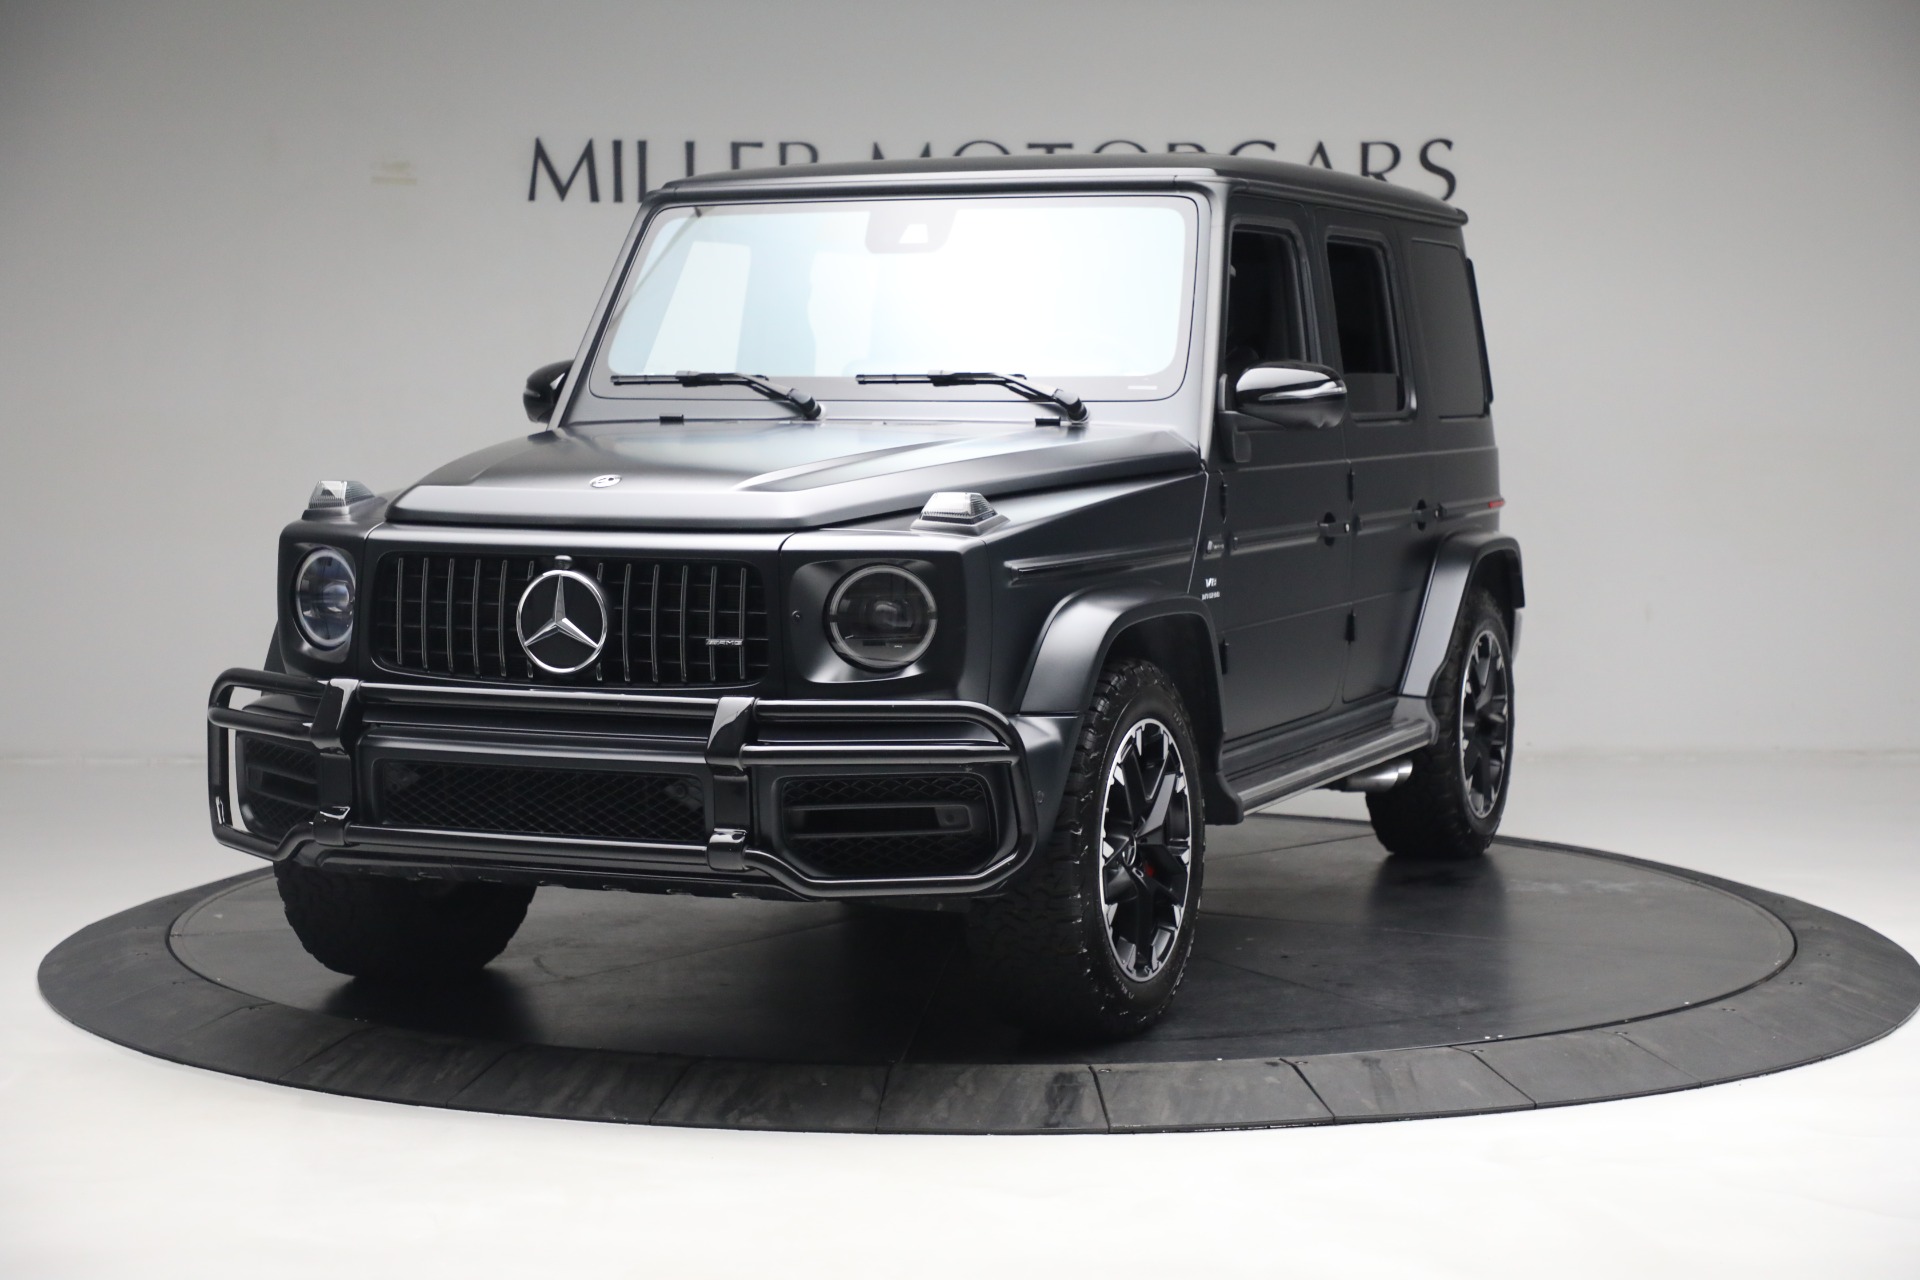 Used 2020 Mercedes-Benz G-Class AMG G 63 for sale $195,900 at Alfa Romeo of Westport in Westport CT 06880 1